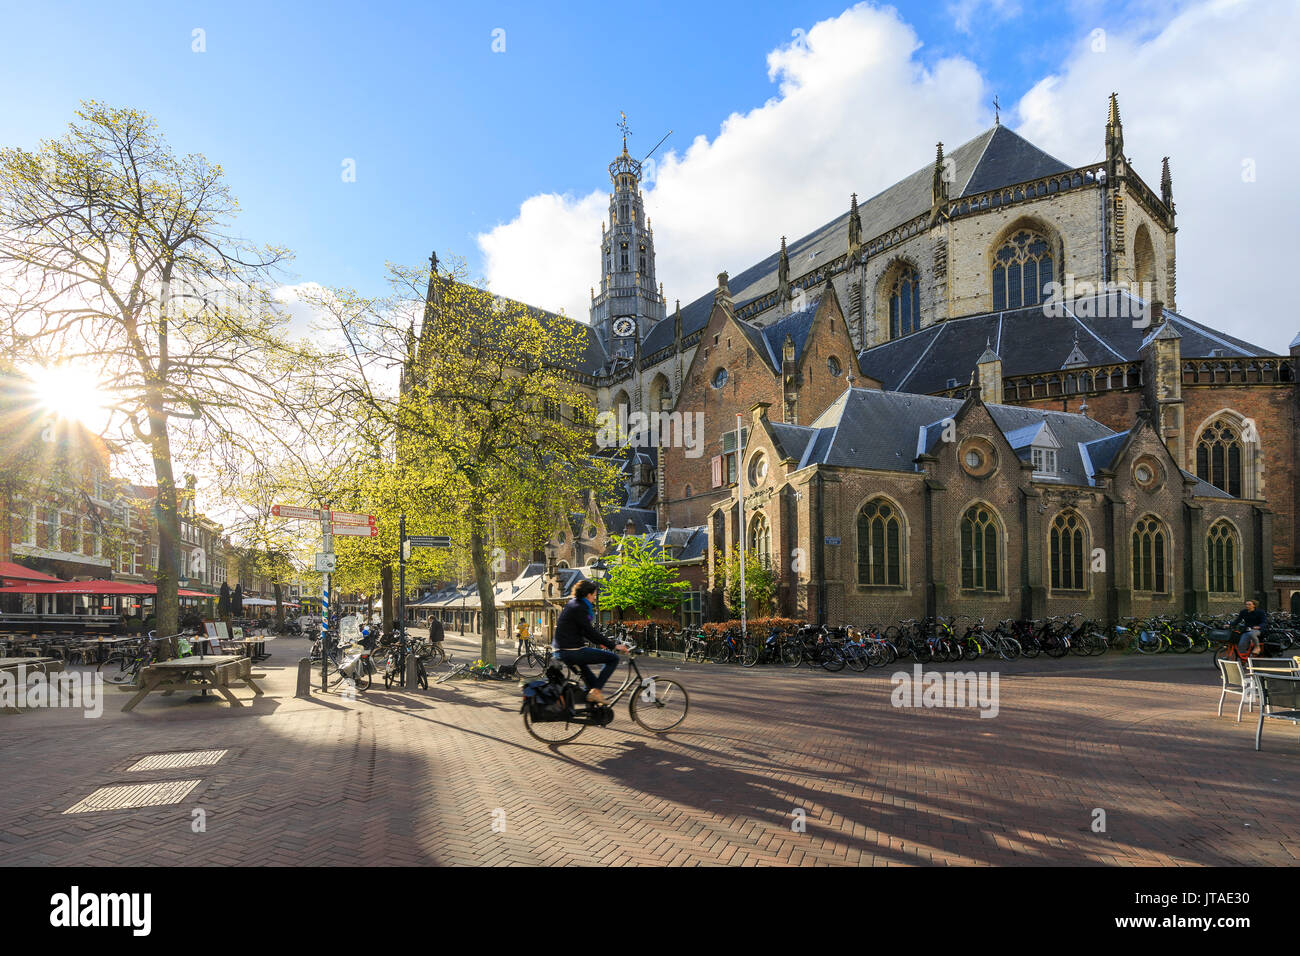 Bicycles in the pedestrian square next to the ancient church Grote Kerk, Haarlem, North Holland, The Netherlands, Europe Stock Photo